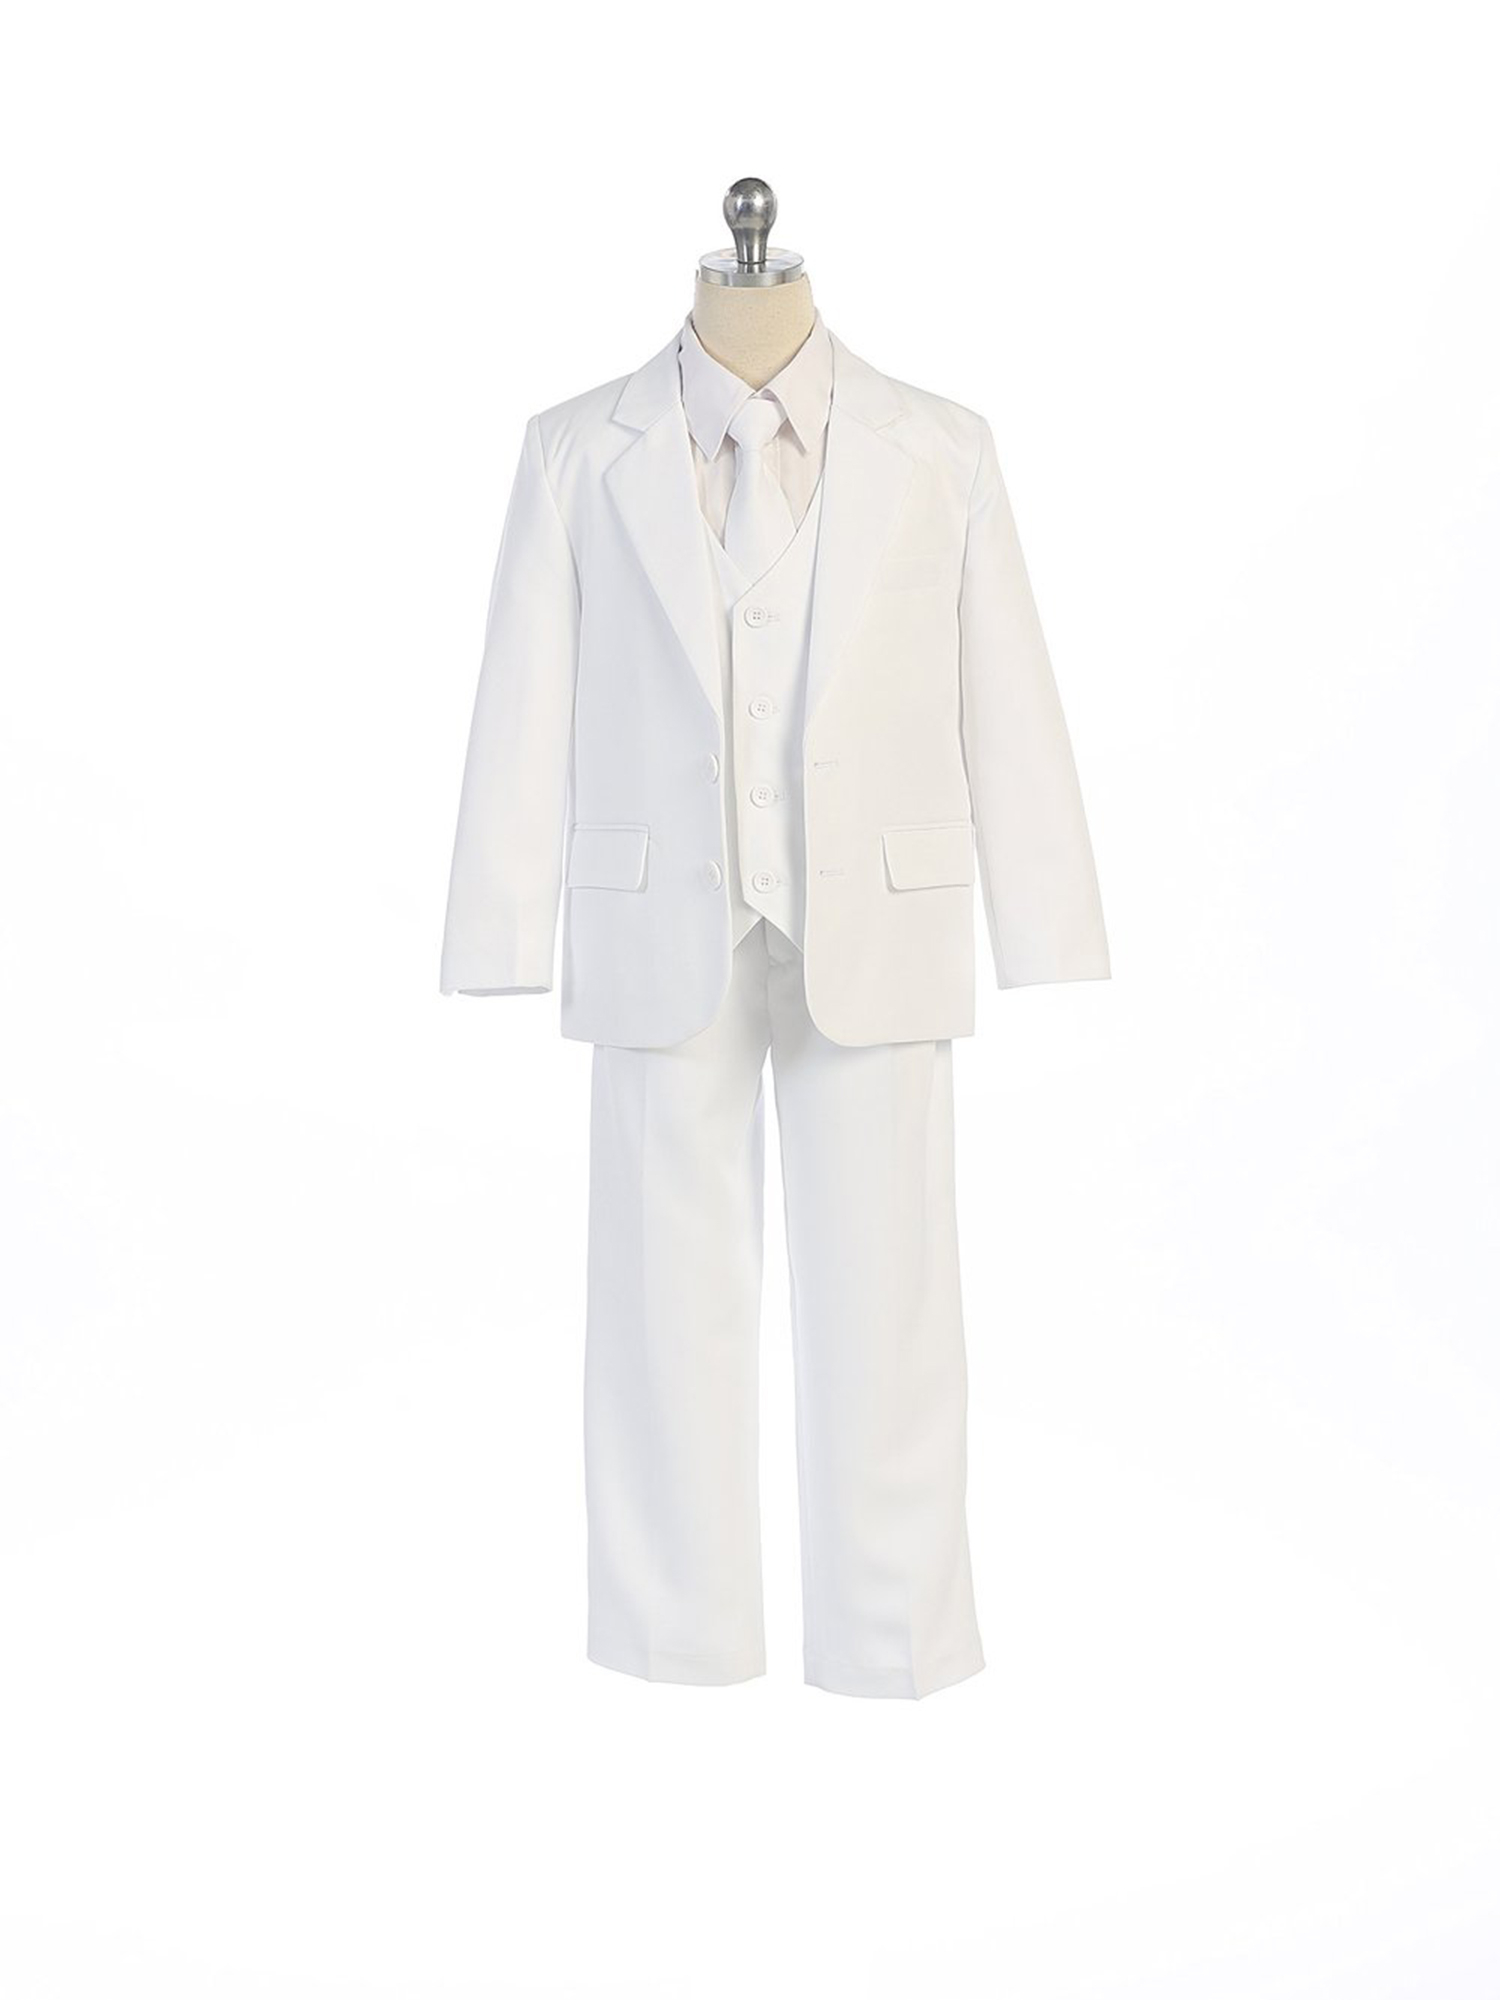 COLE Boys Suit with Shirt and Vest (5-Piece) - (20 Husky, White)